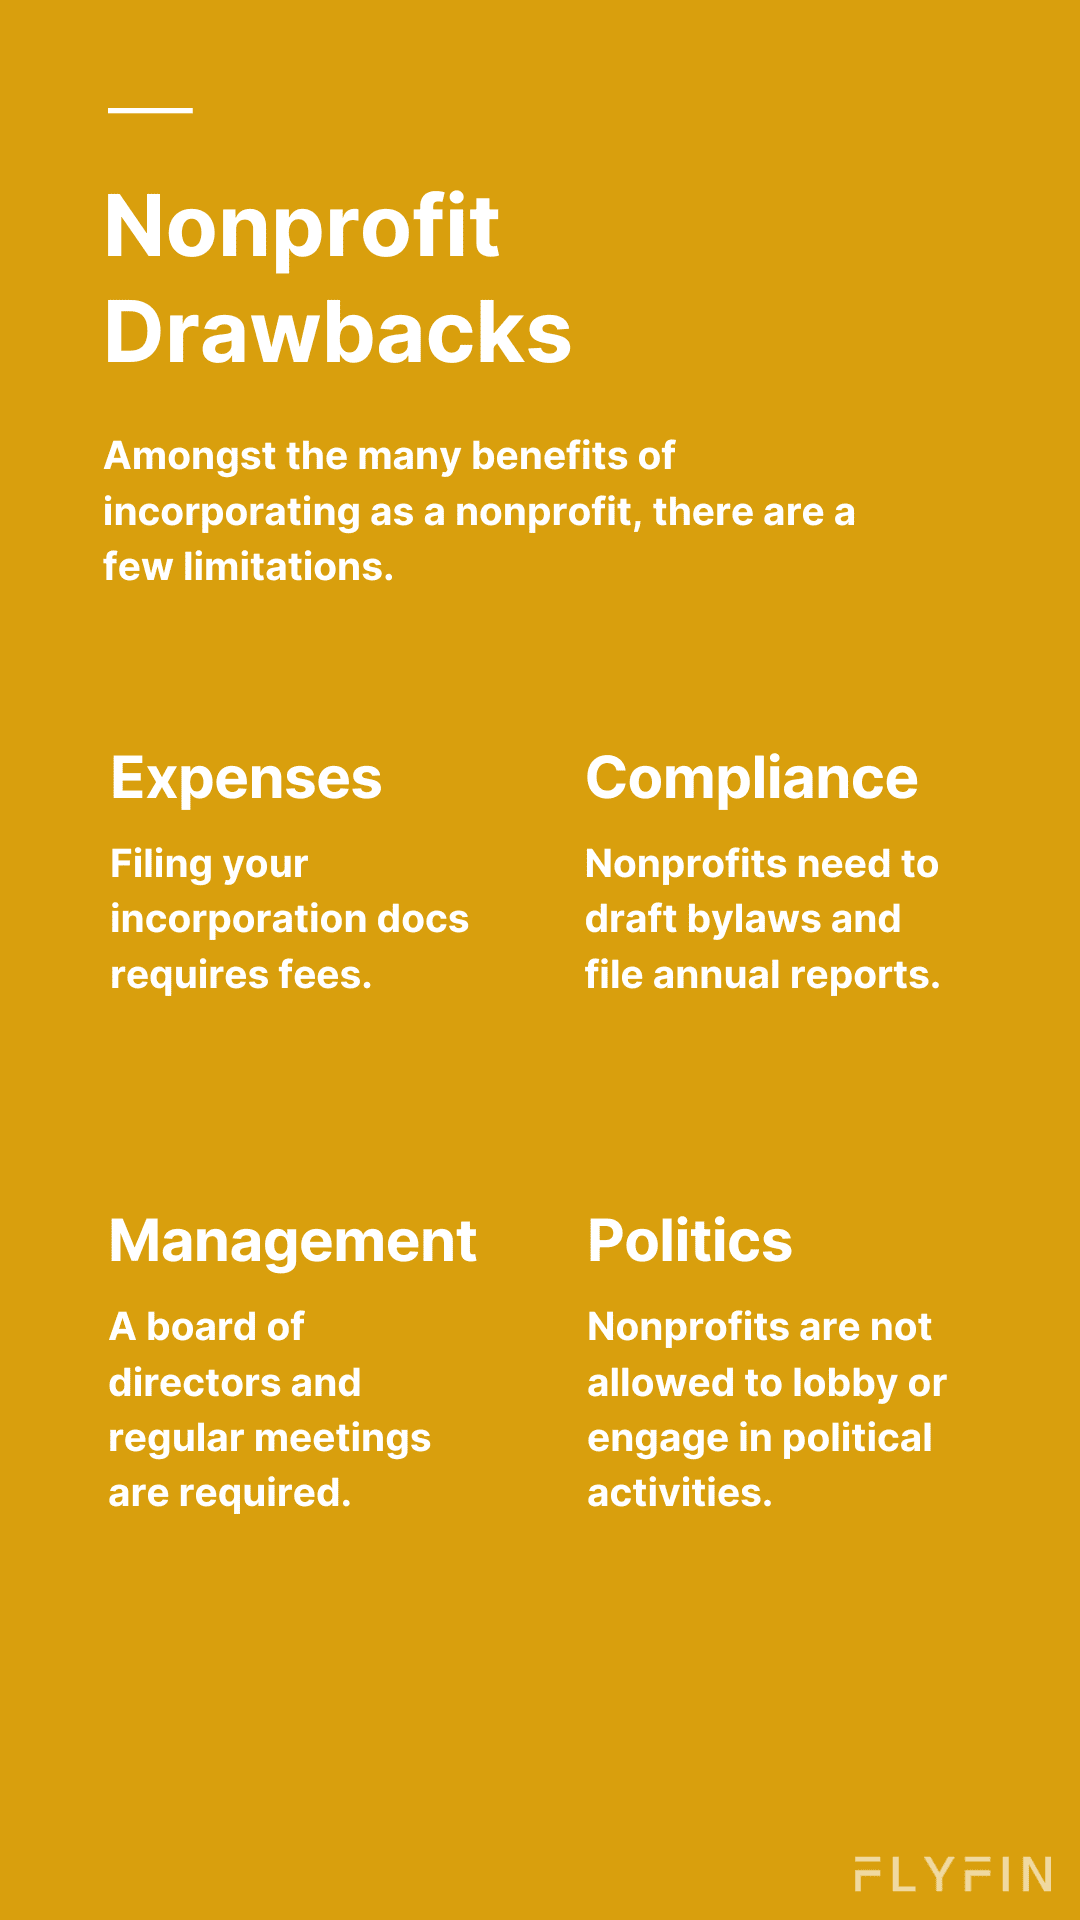 Image describing the limitations of incorporating as a nonprofit, including expenses, compliance, management, and restrictions on political activities. No relevance to self employed, 1099, freelancer or taxes.